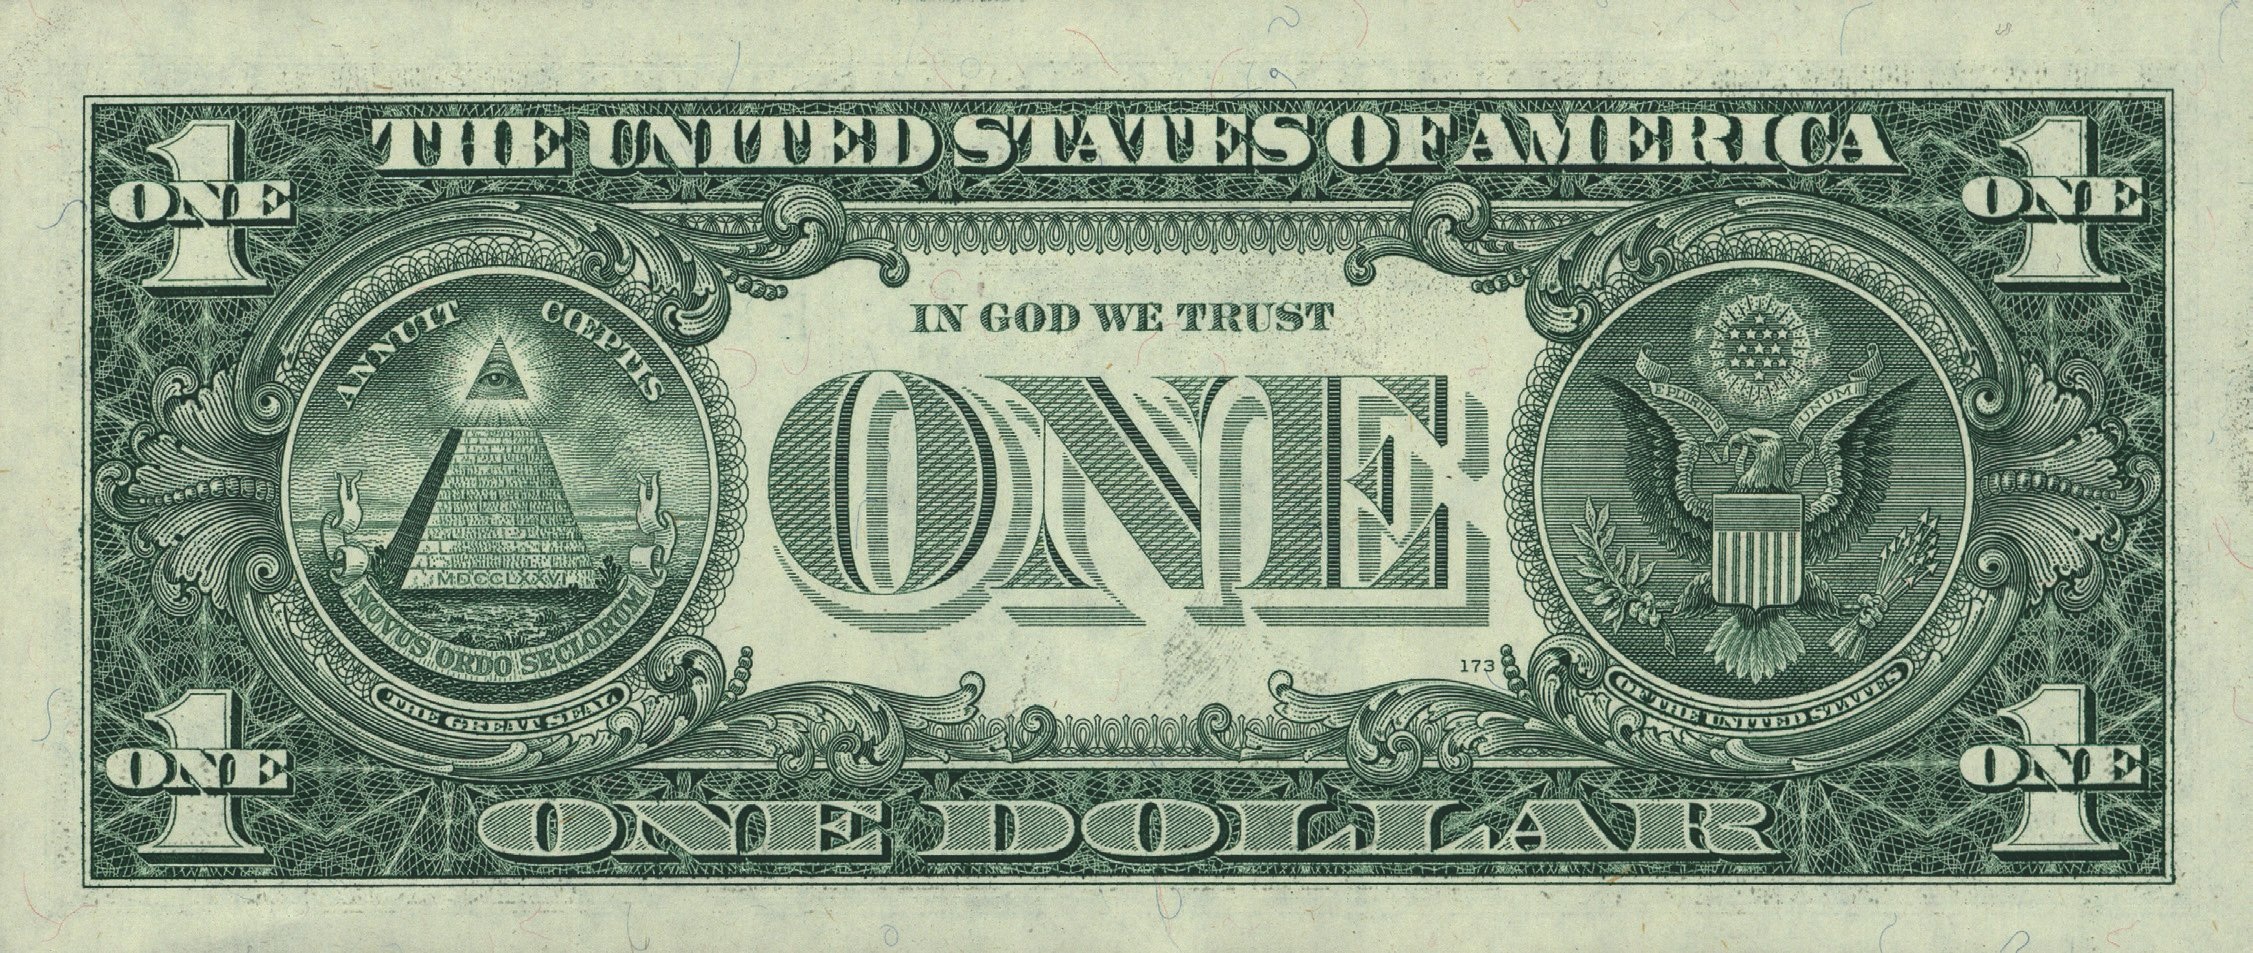 Should “God” be removed from the US Monetary system and bills?